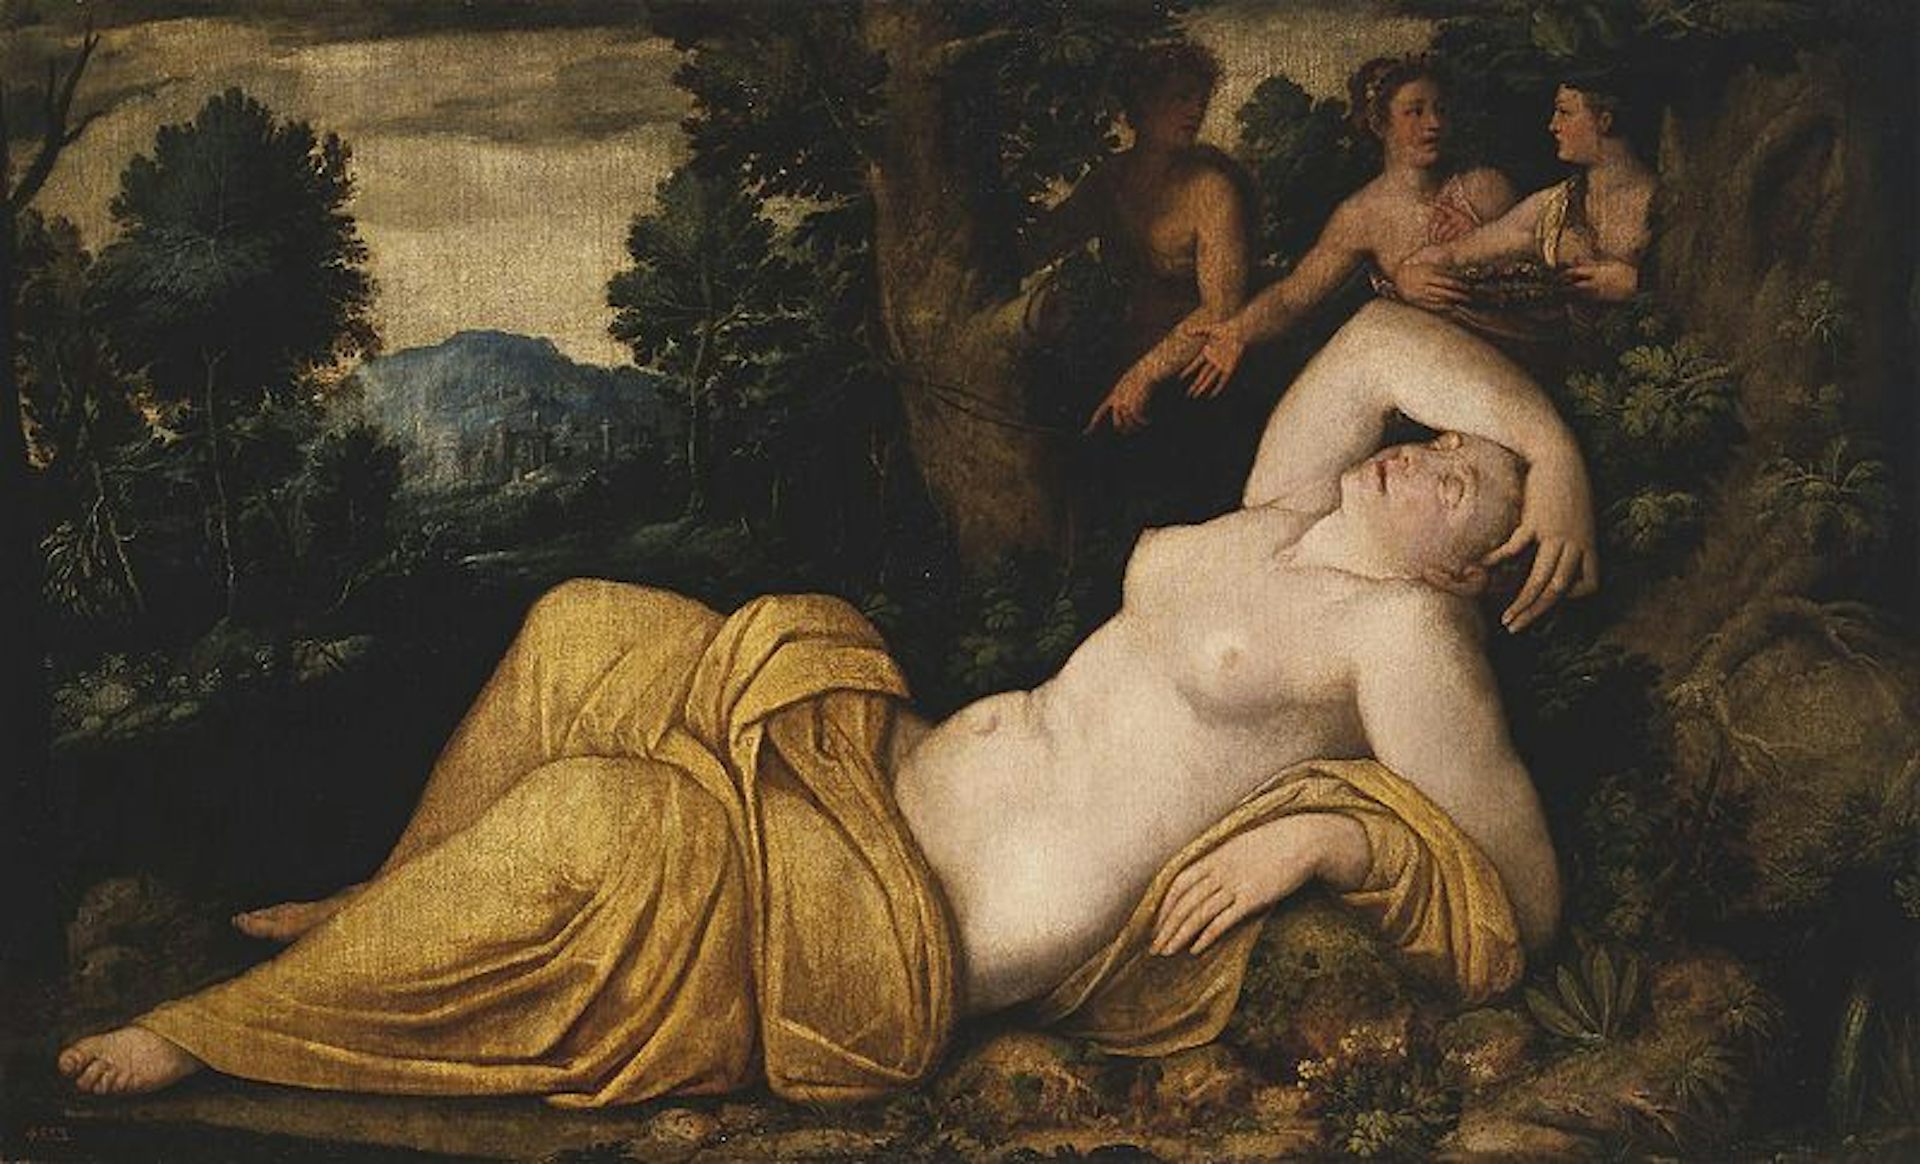 Lascivious virgins and lustful itches womens masturbation in early England